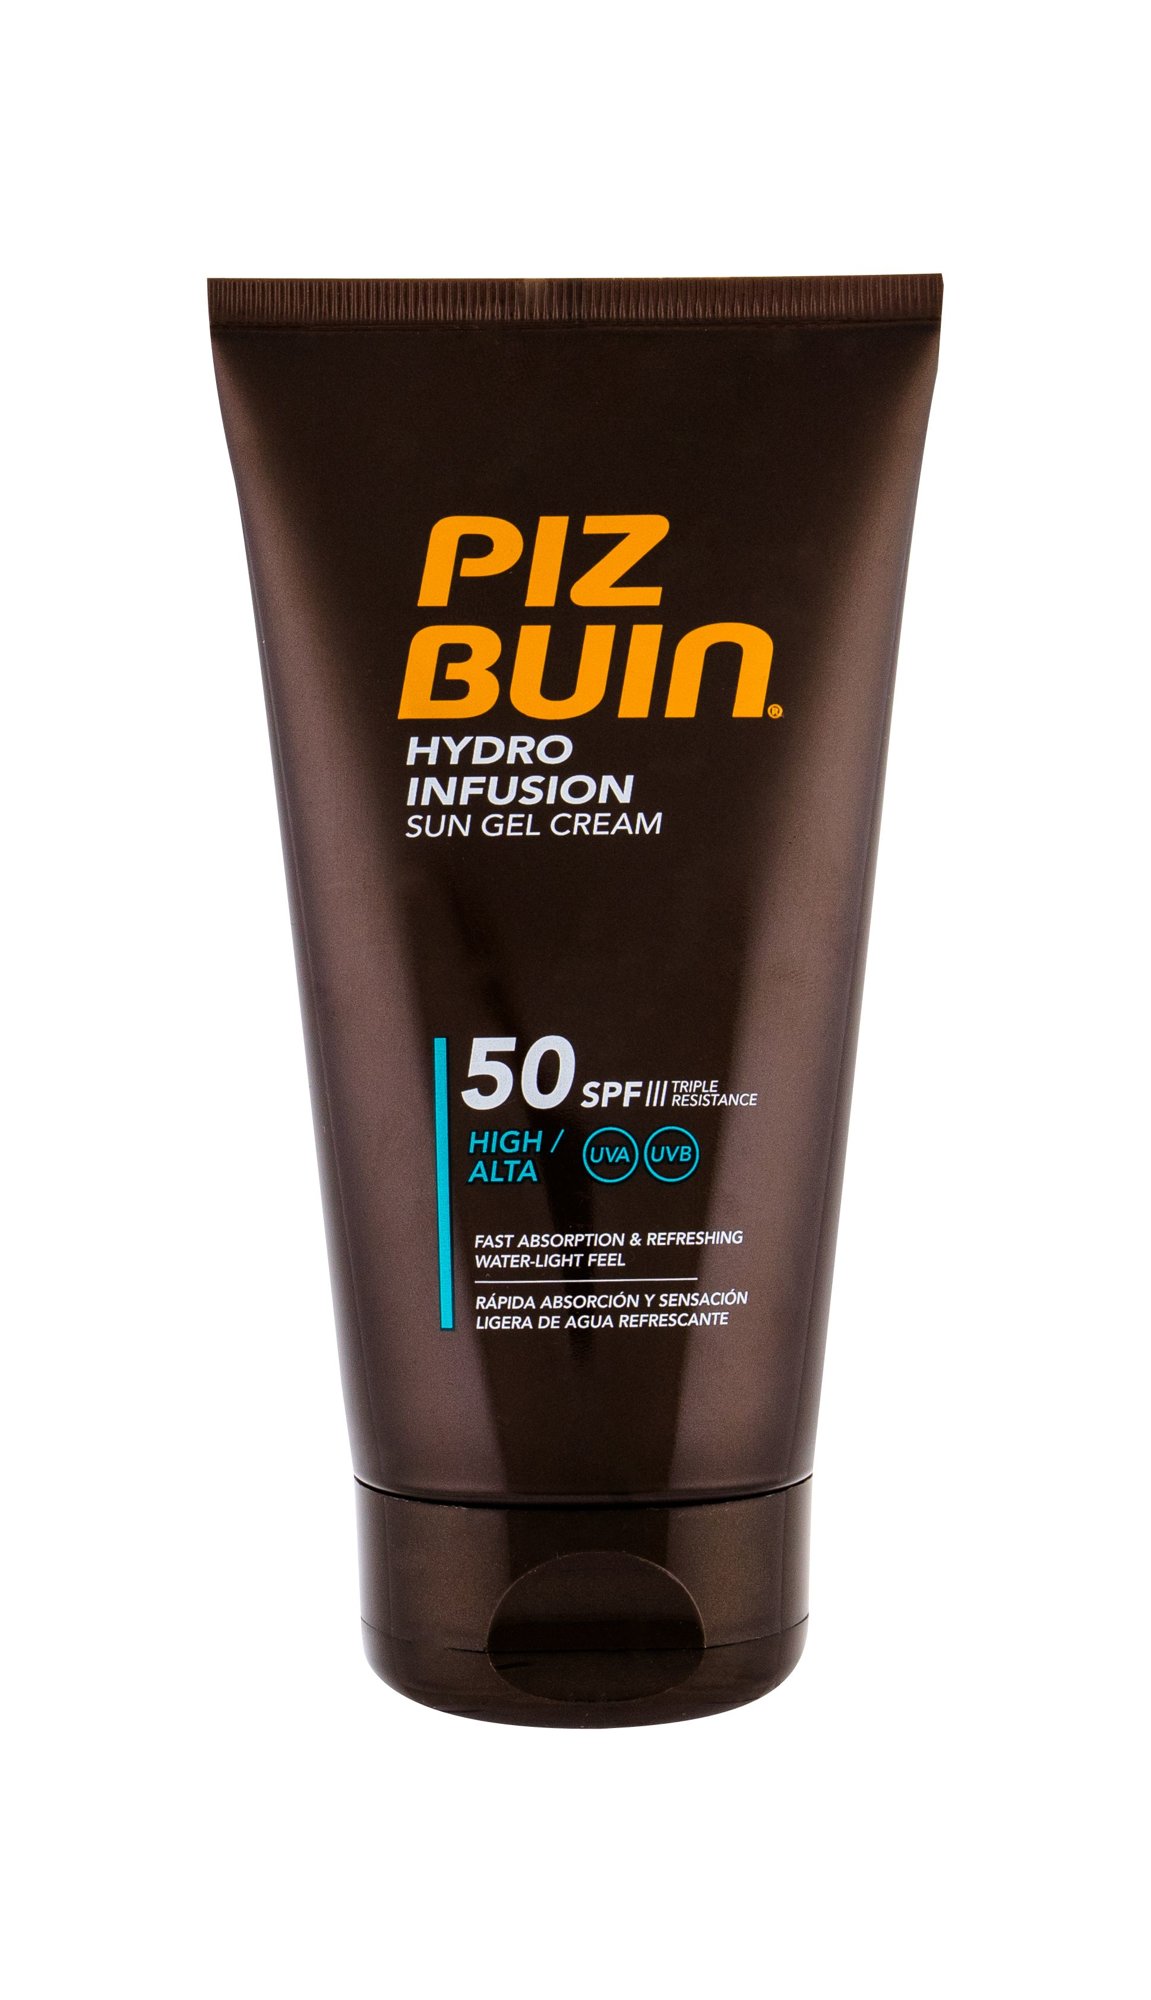 PIZ BUIN Hydro Infusion